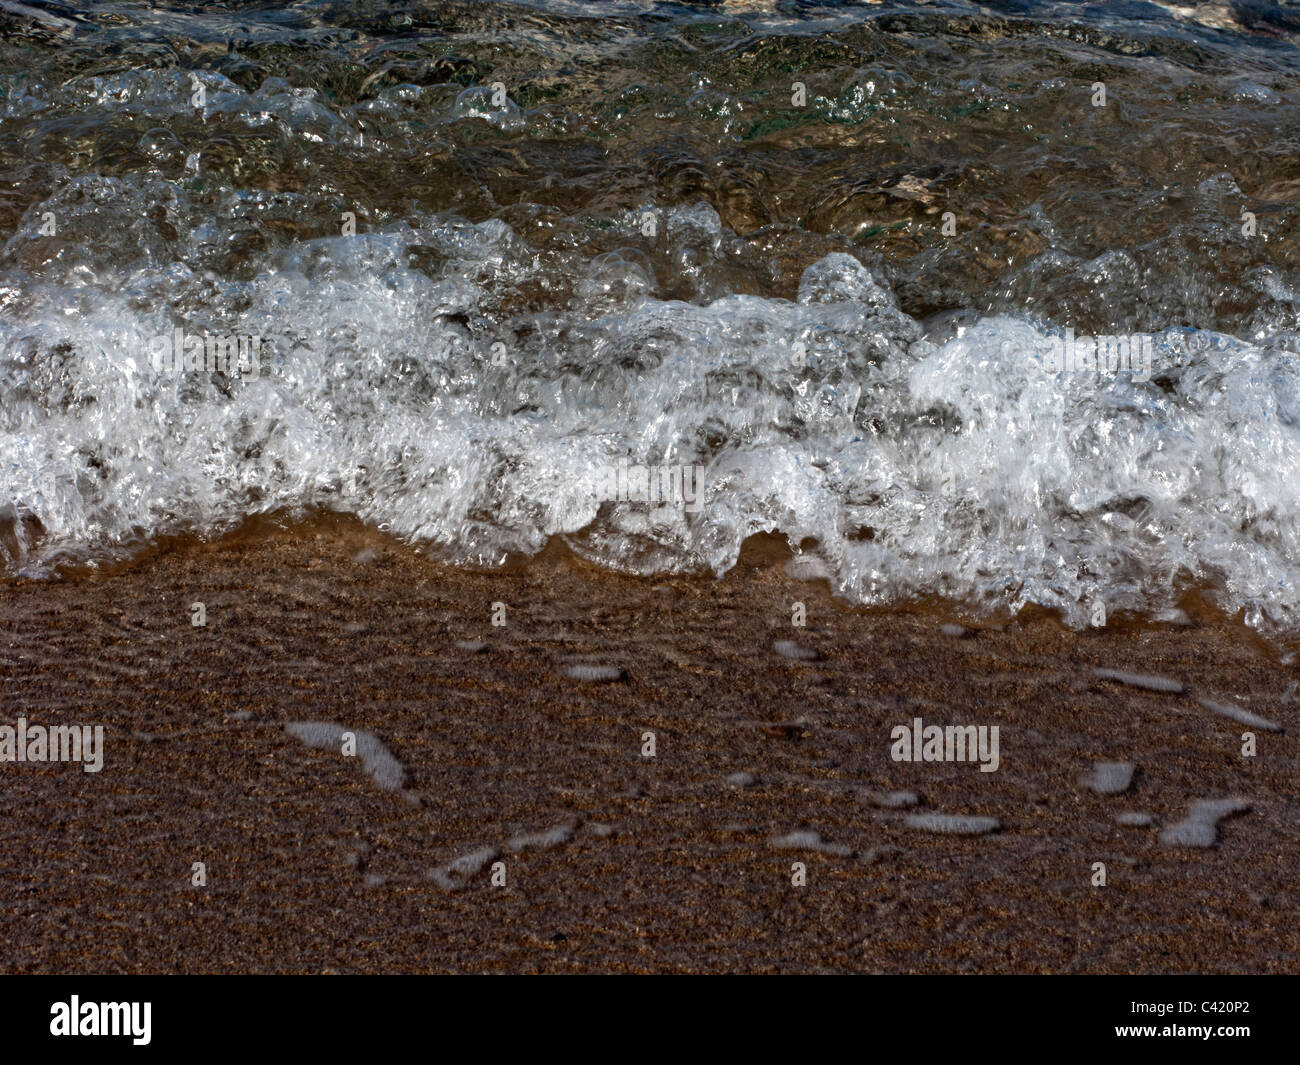 ABSTRACT IMAGE OF WAVES LAPPING ONTO A BEACH Stock Photo